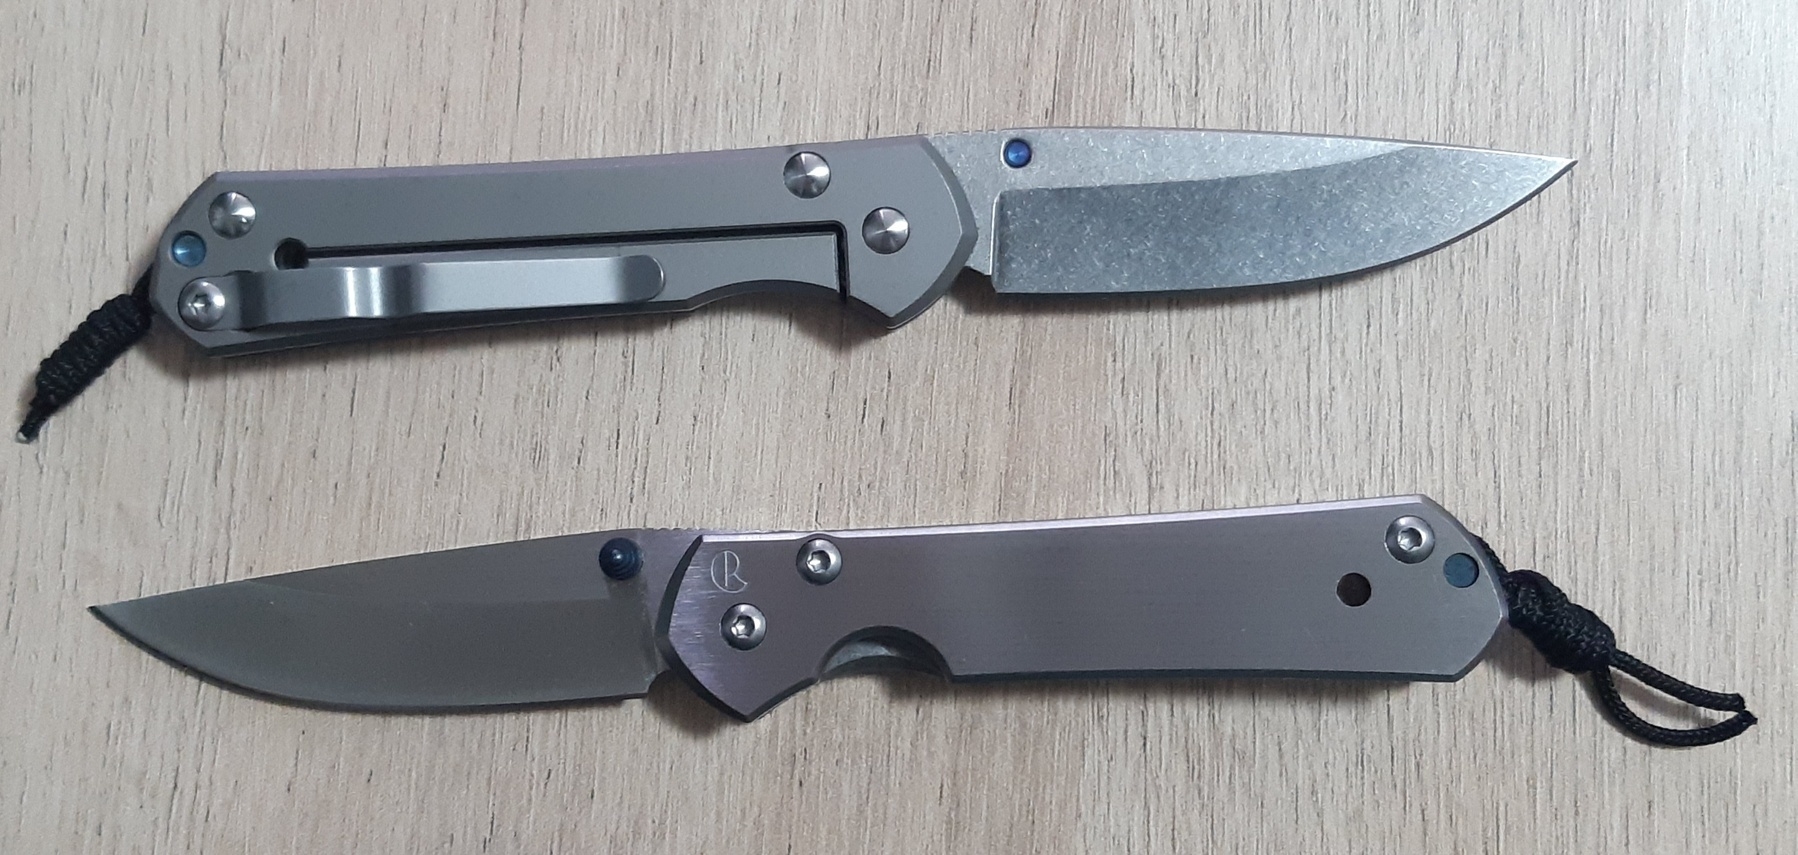 Photo of two opened folding knives.